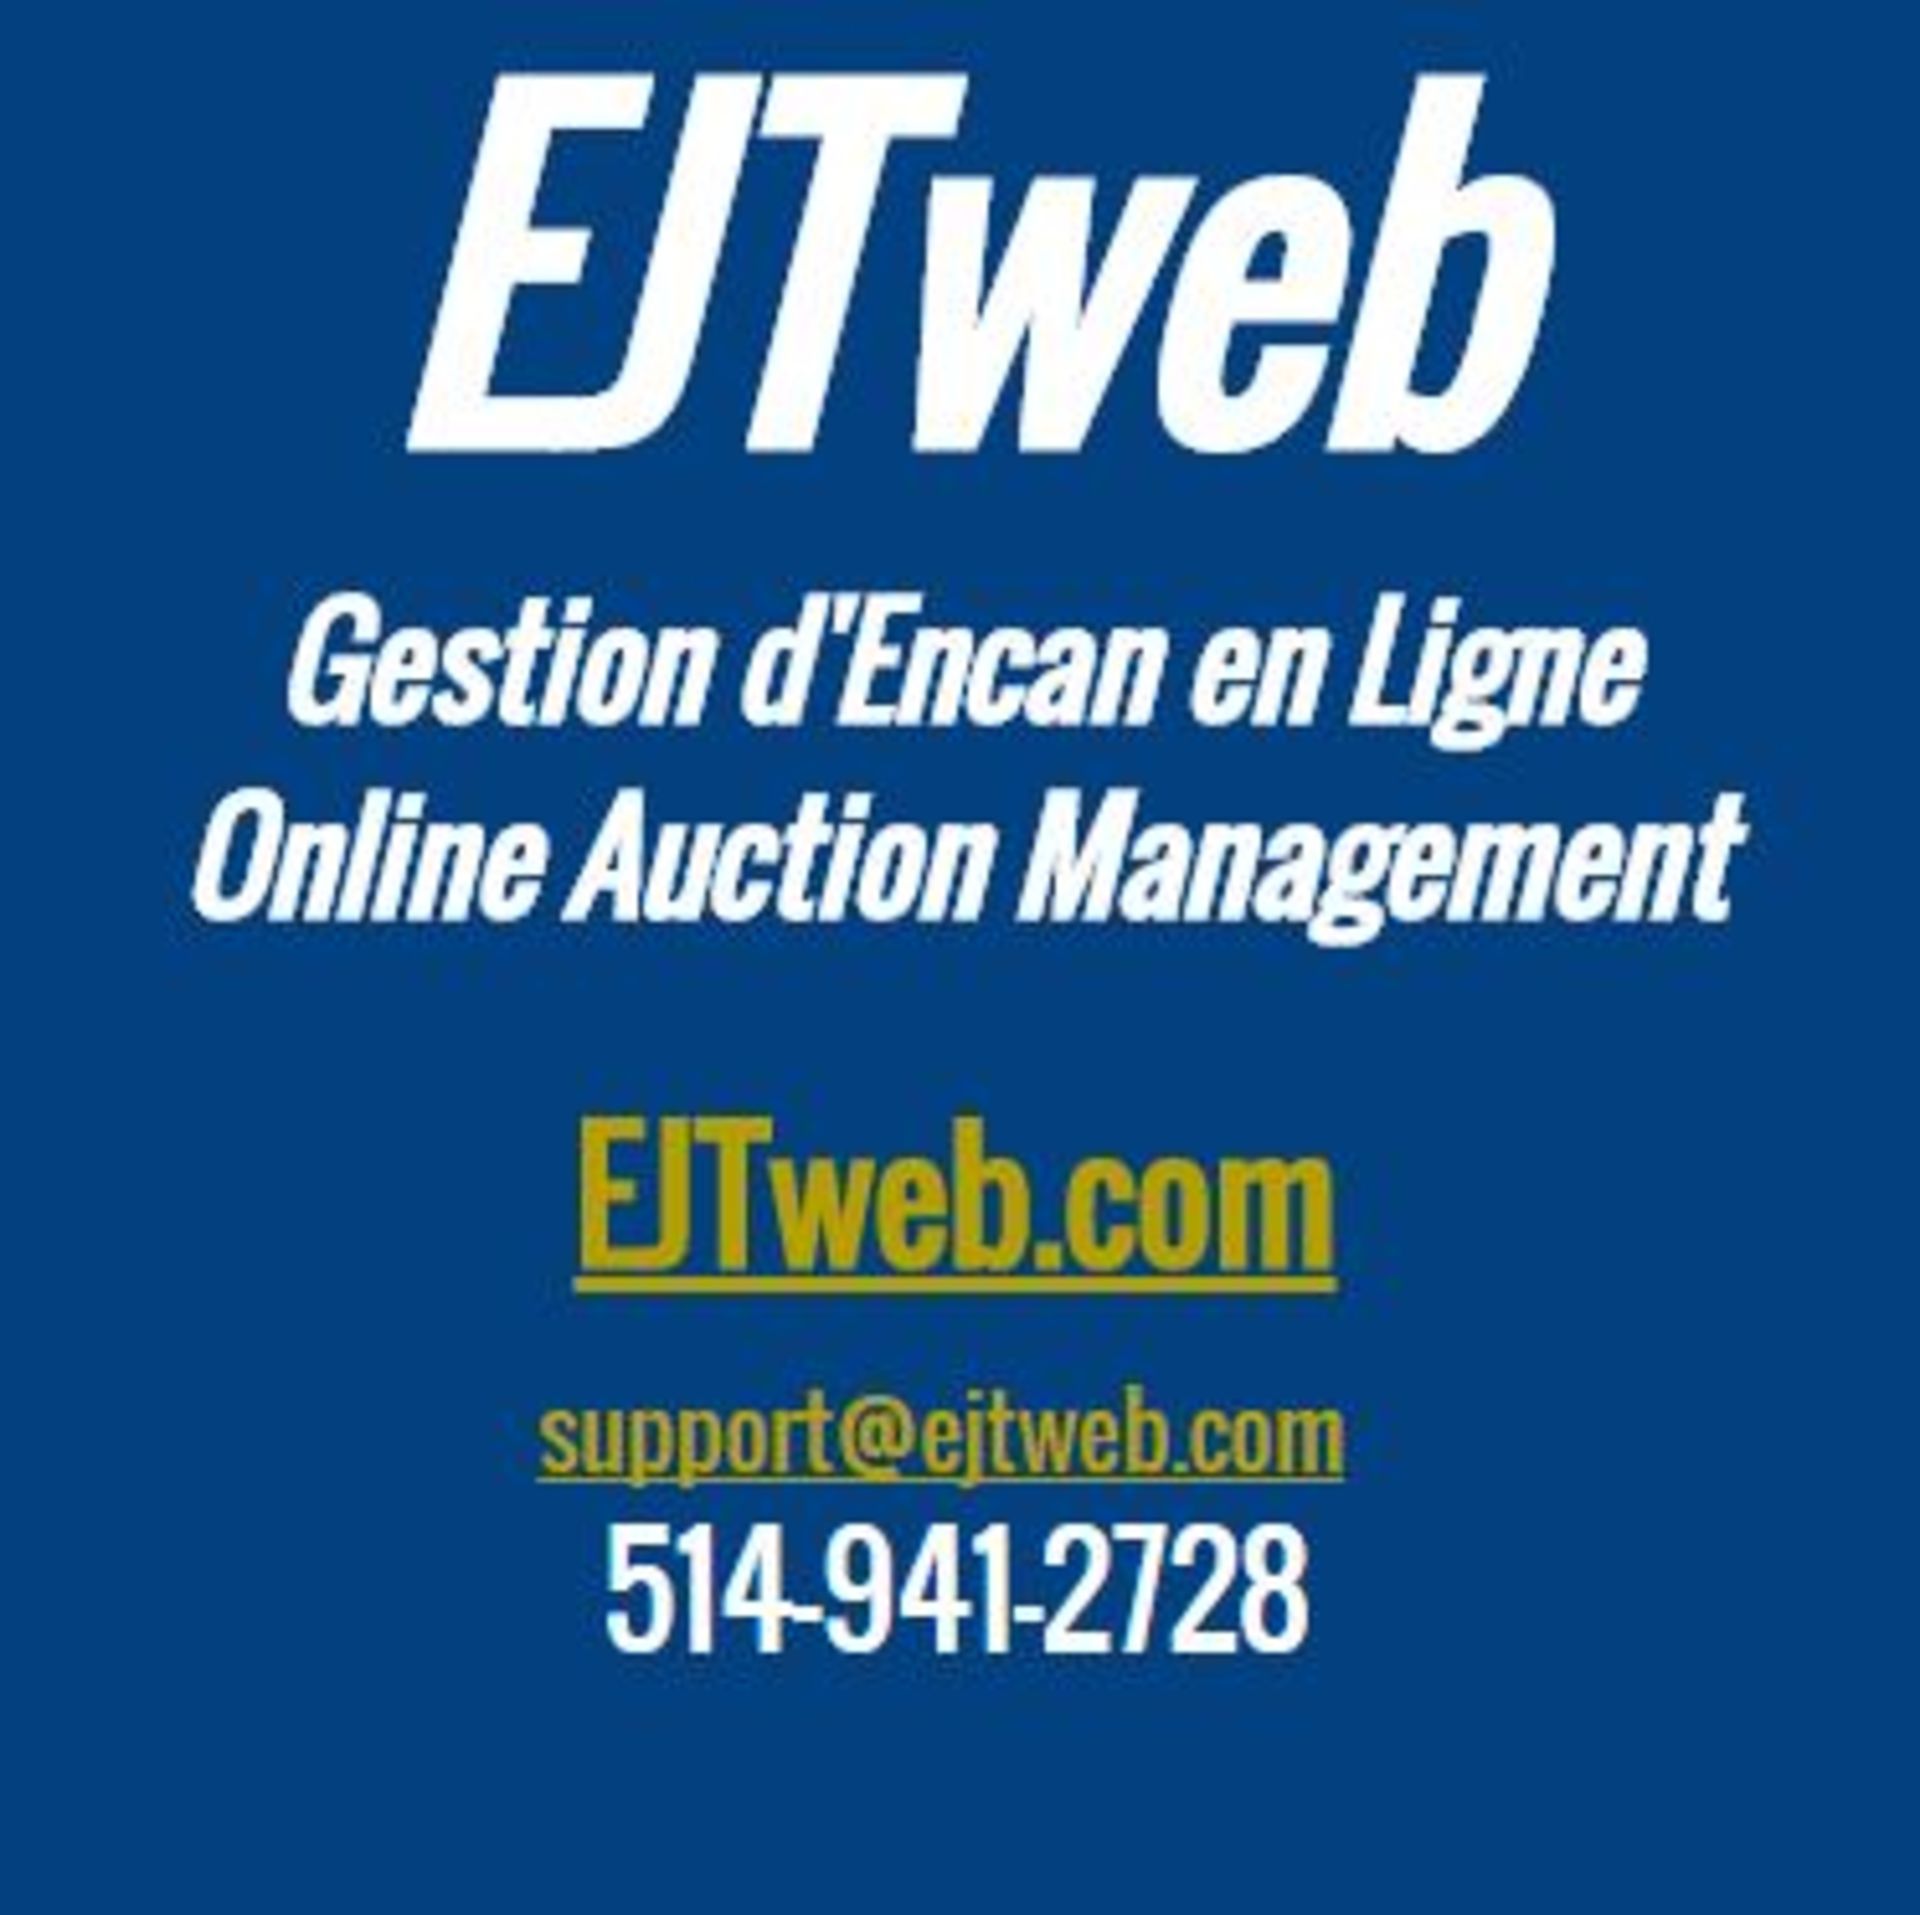 Contact us for technical assistance and/or translations * support@ejtweb.com 514-941-2728